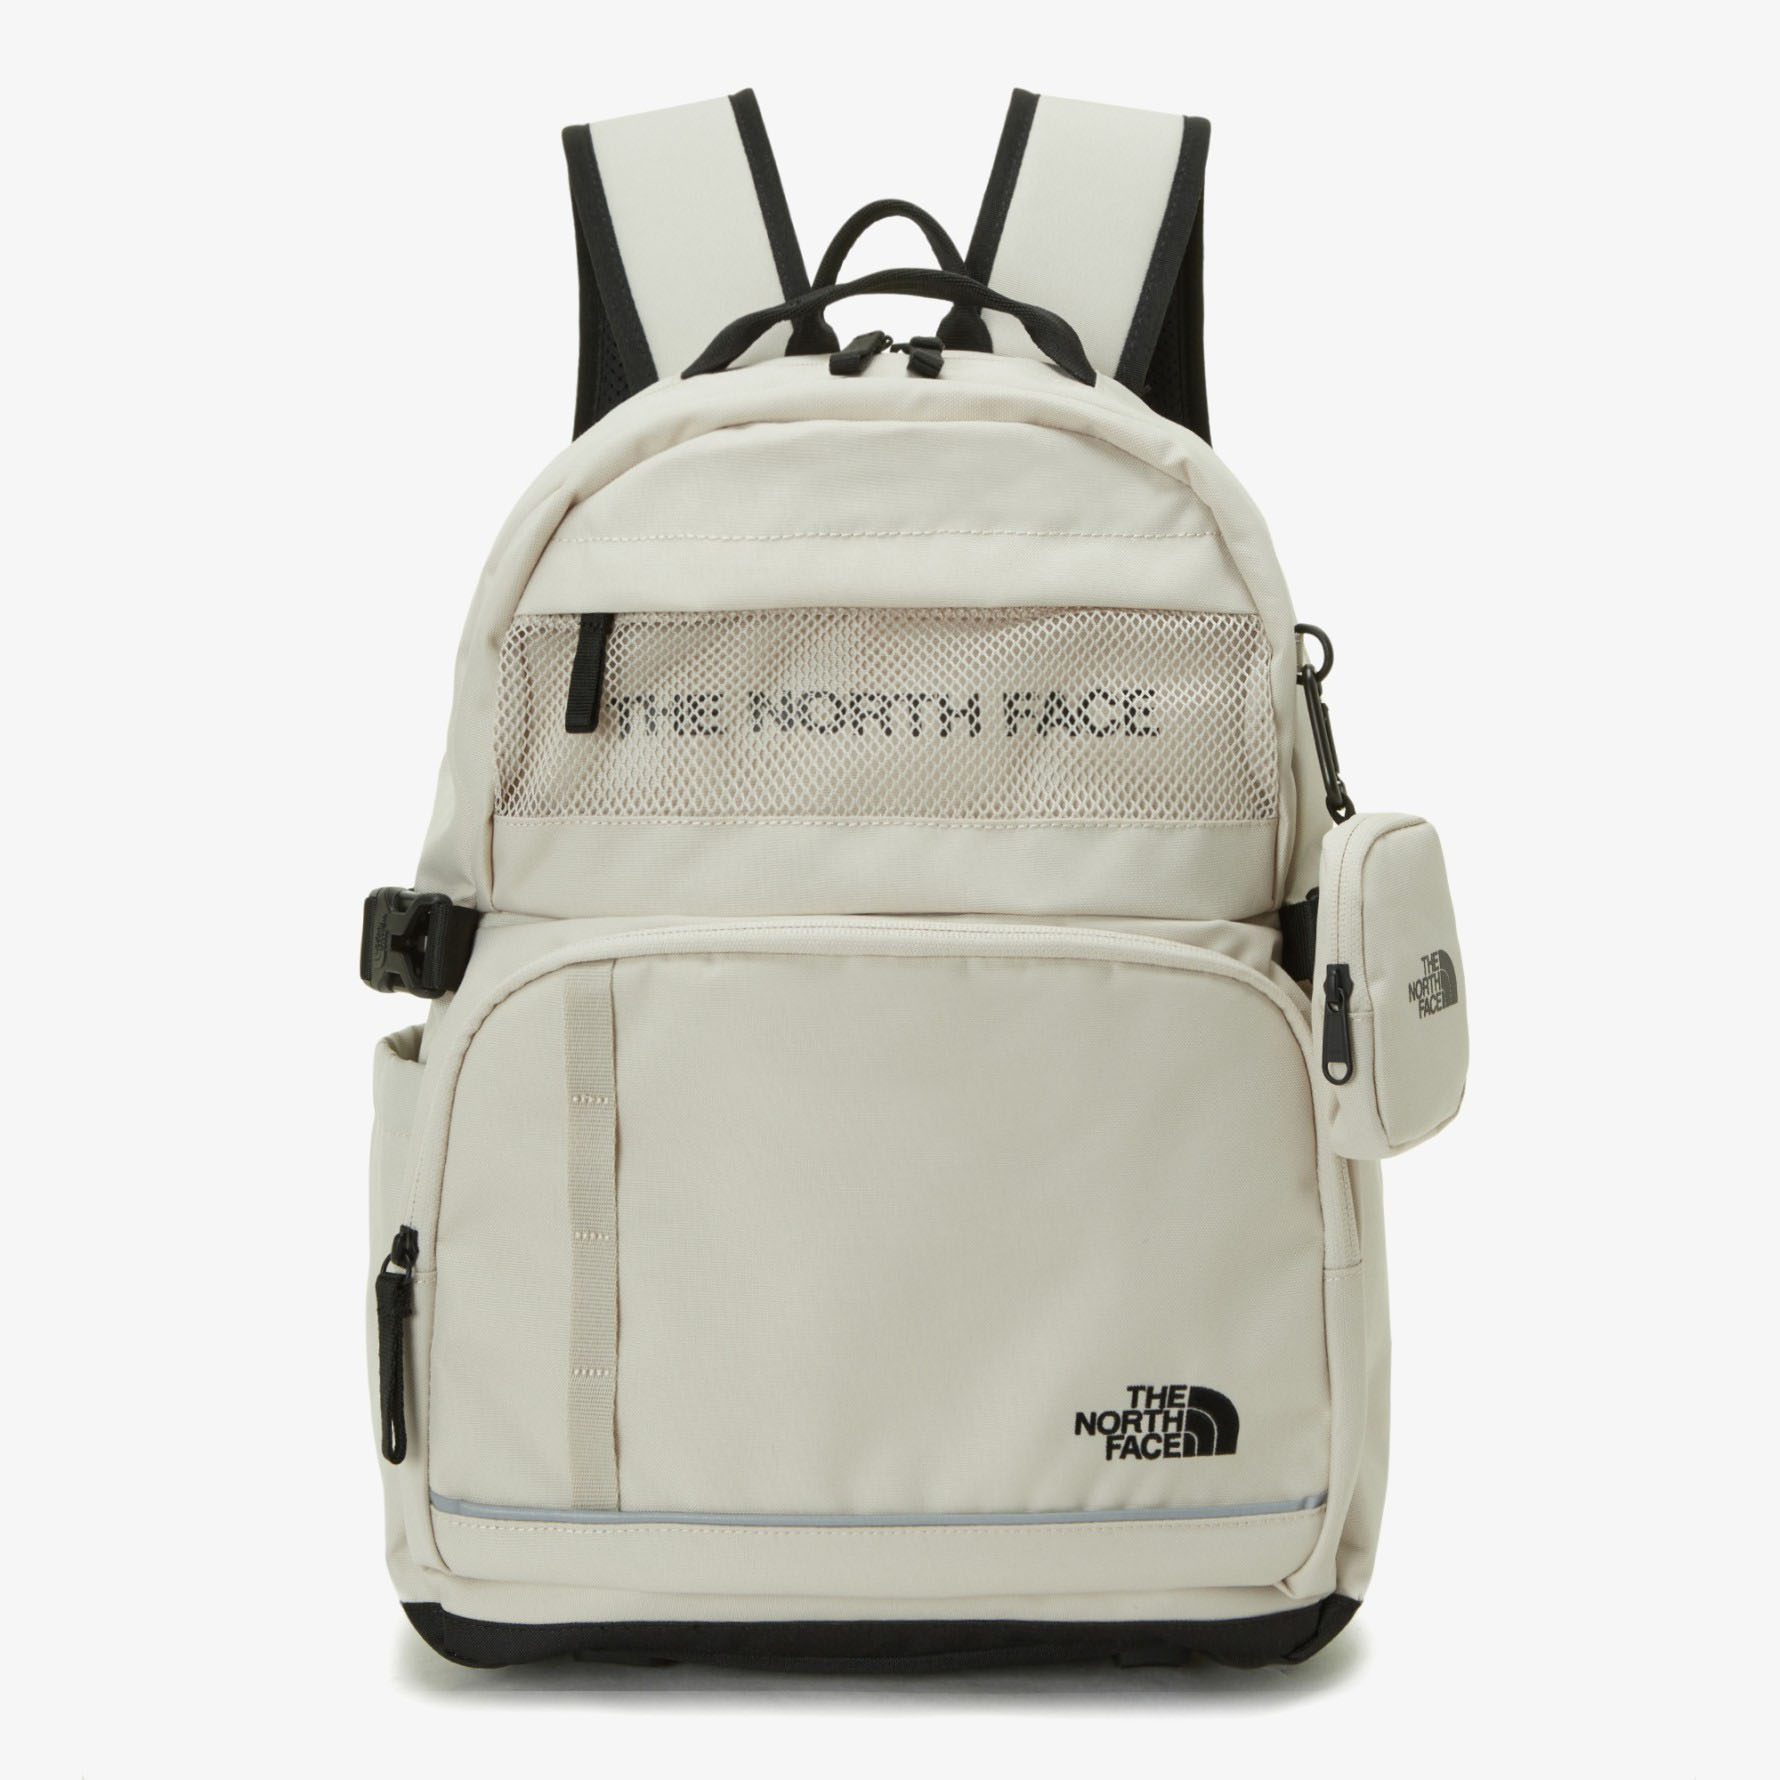 THE NORTH FACE キッズ ノースフェイス リュックサック Jr. SCHOOL PACK スクールバッグ 18リットル バックパック リュック CREAM BLACK キッズ用 NM2DP50S/R｜a-dot｜02